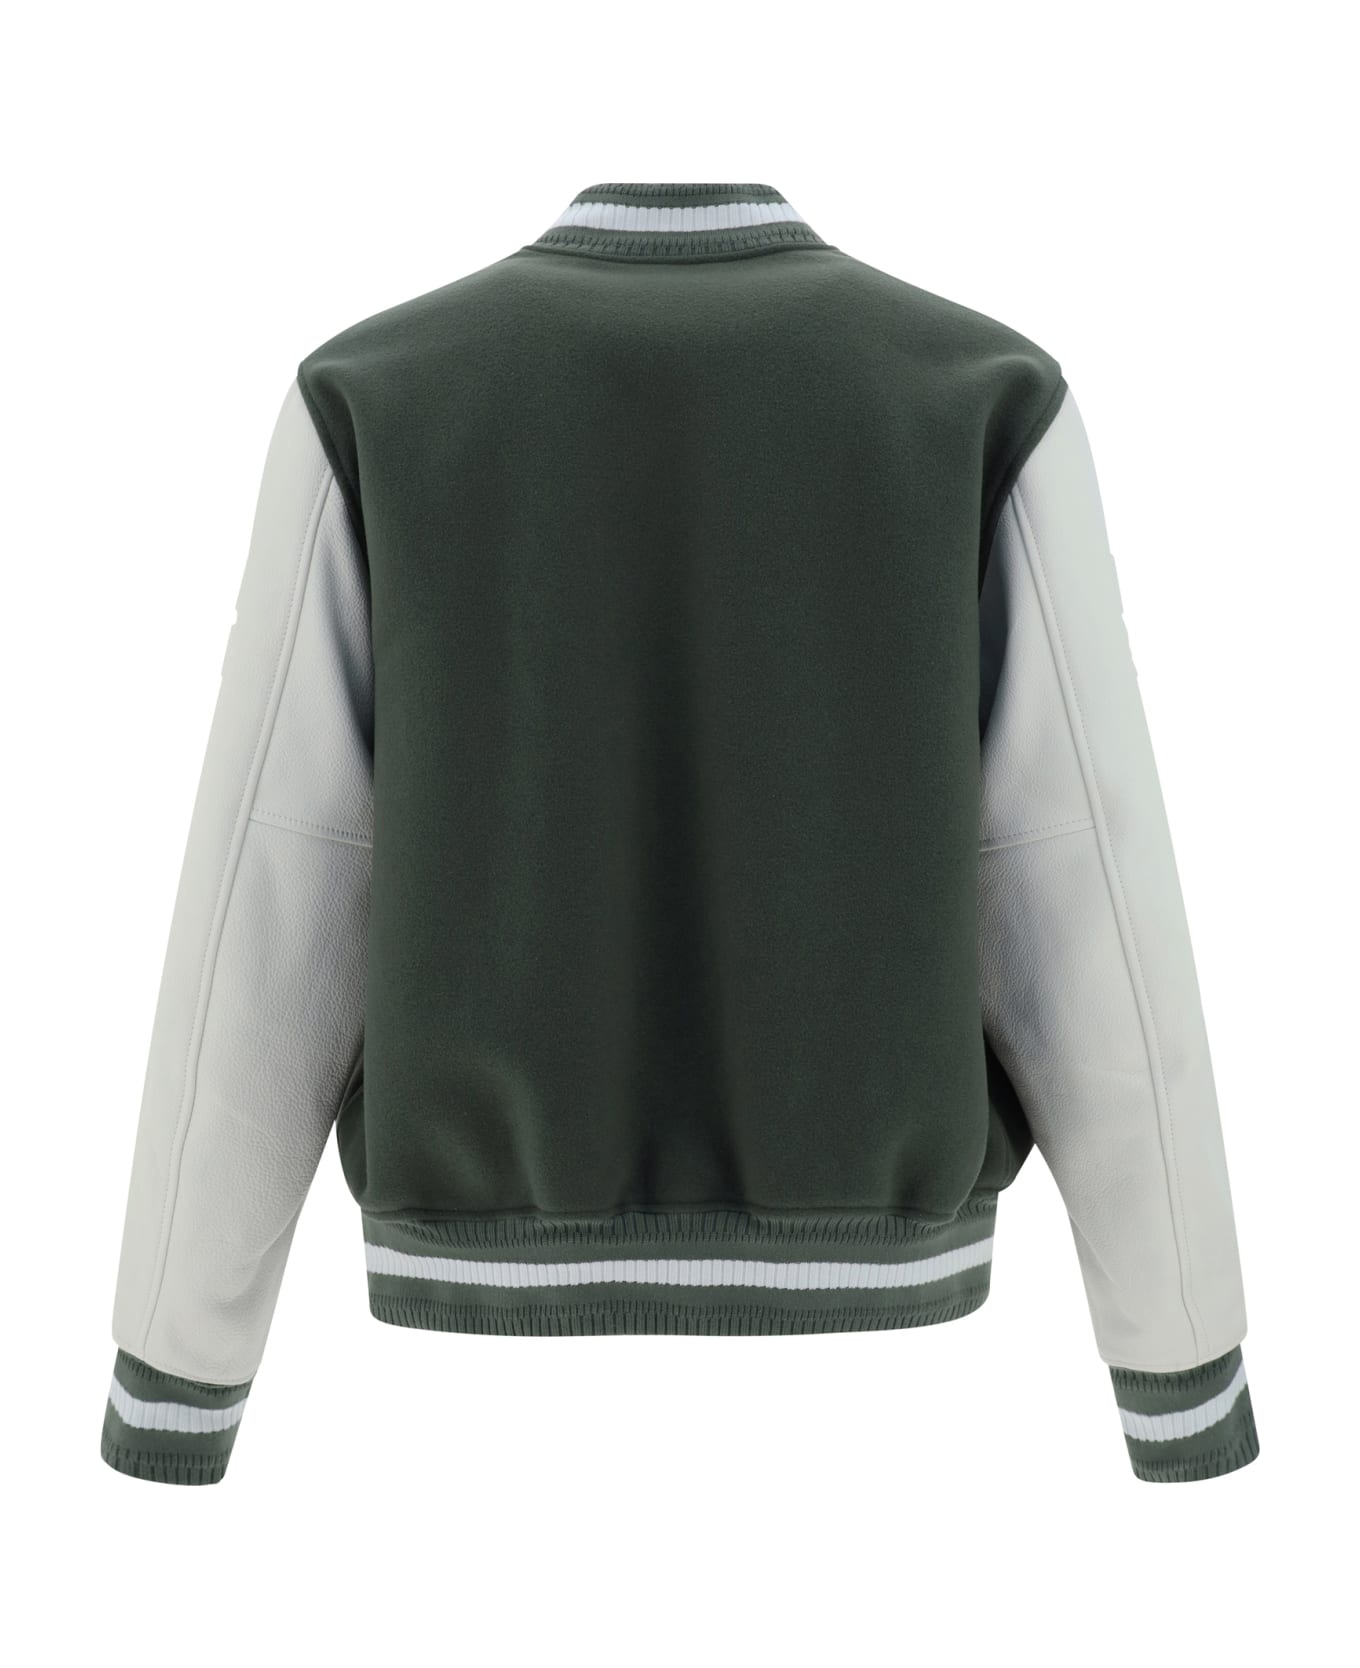 Givenchy Bomber Jacket In Wool And Leather - Green